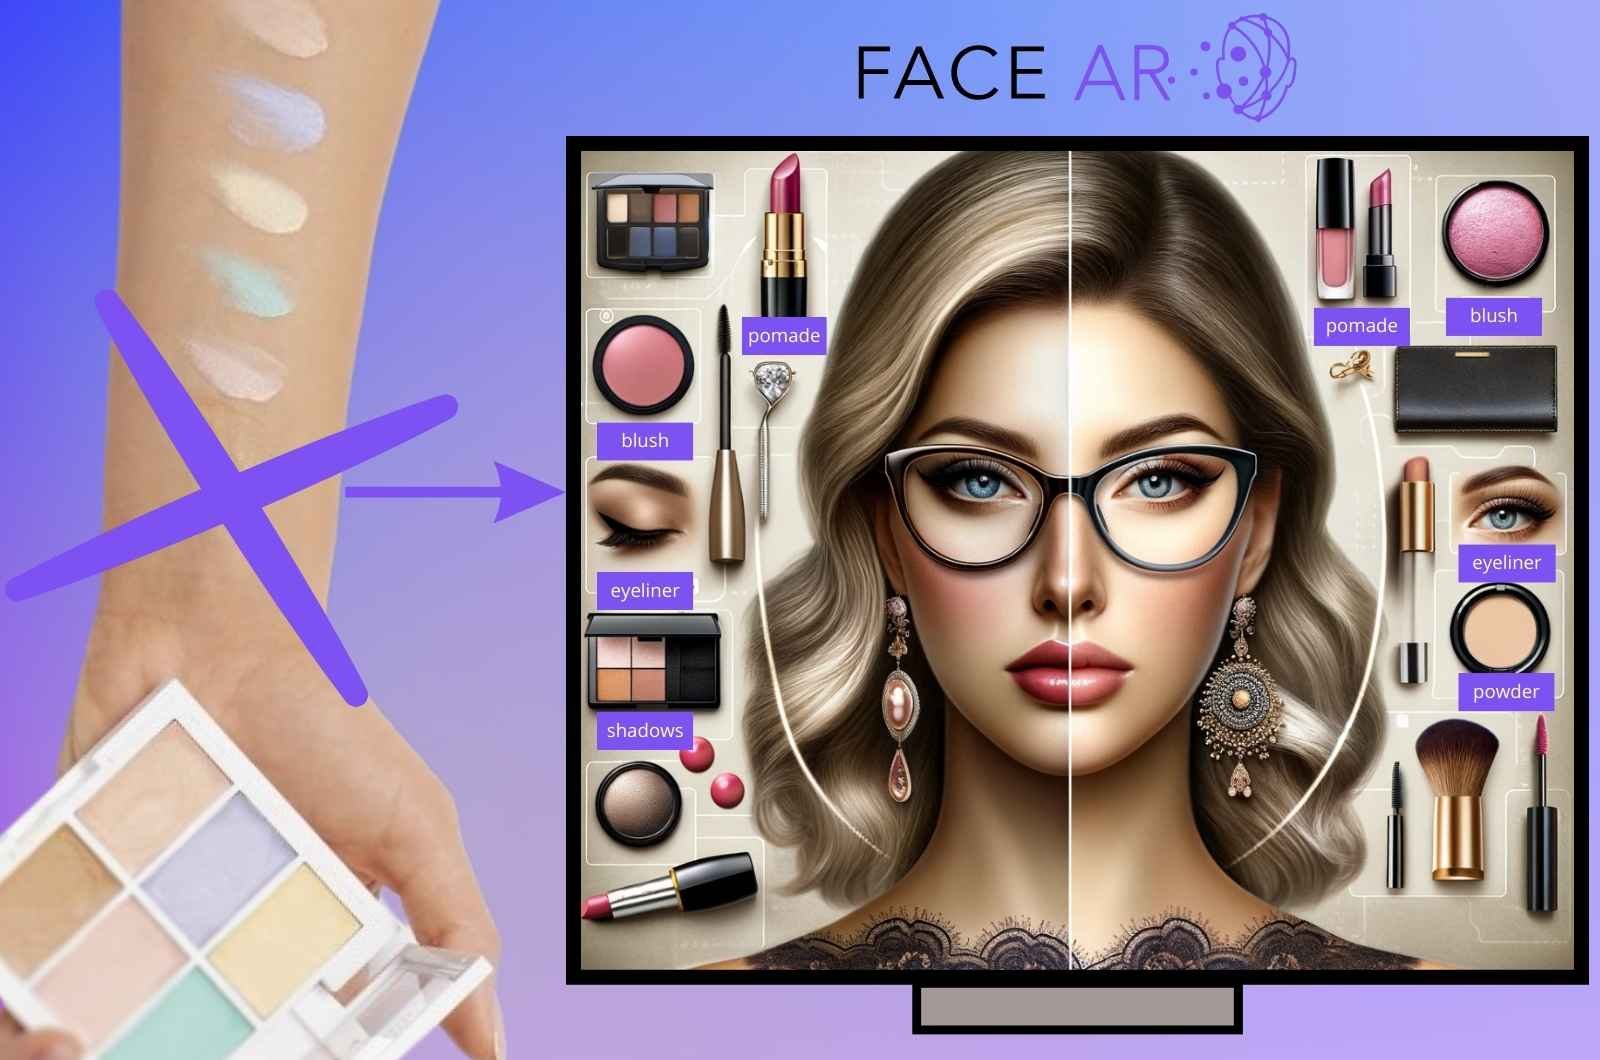 From Swatches to Screens: How AR is Reshaping Cosmetic Selection Online